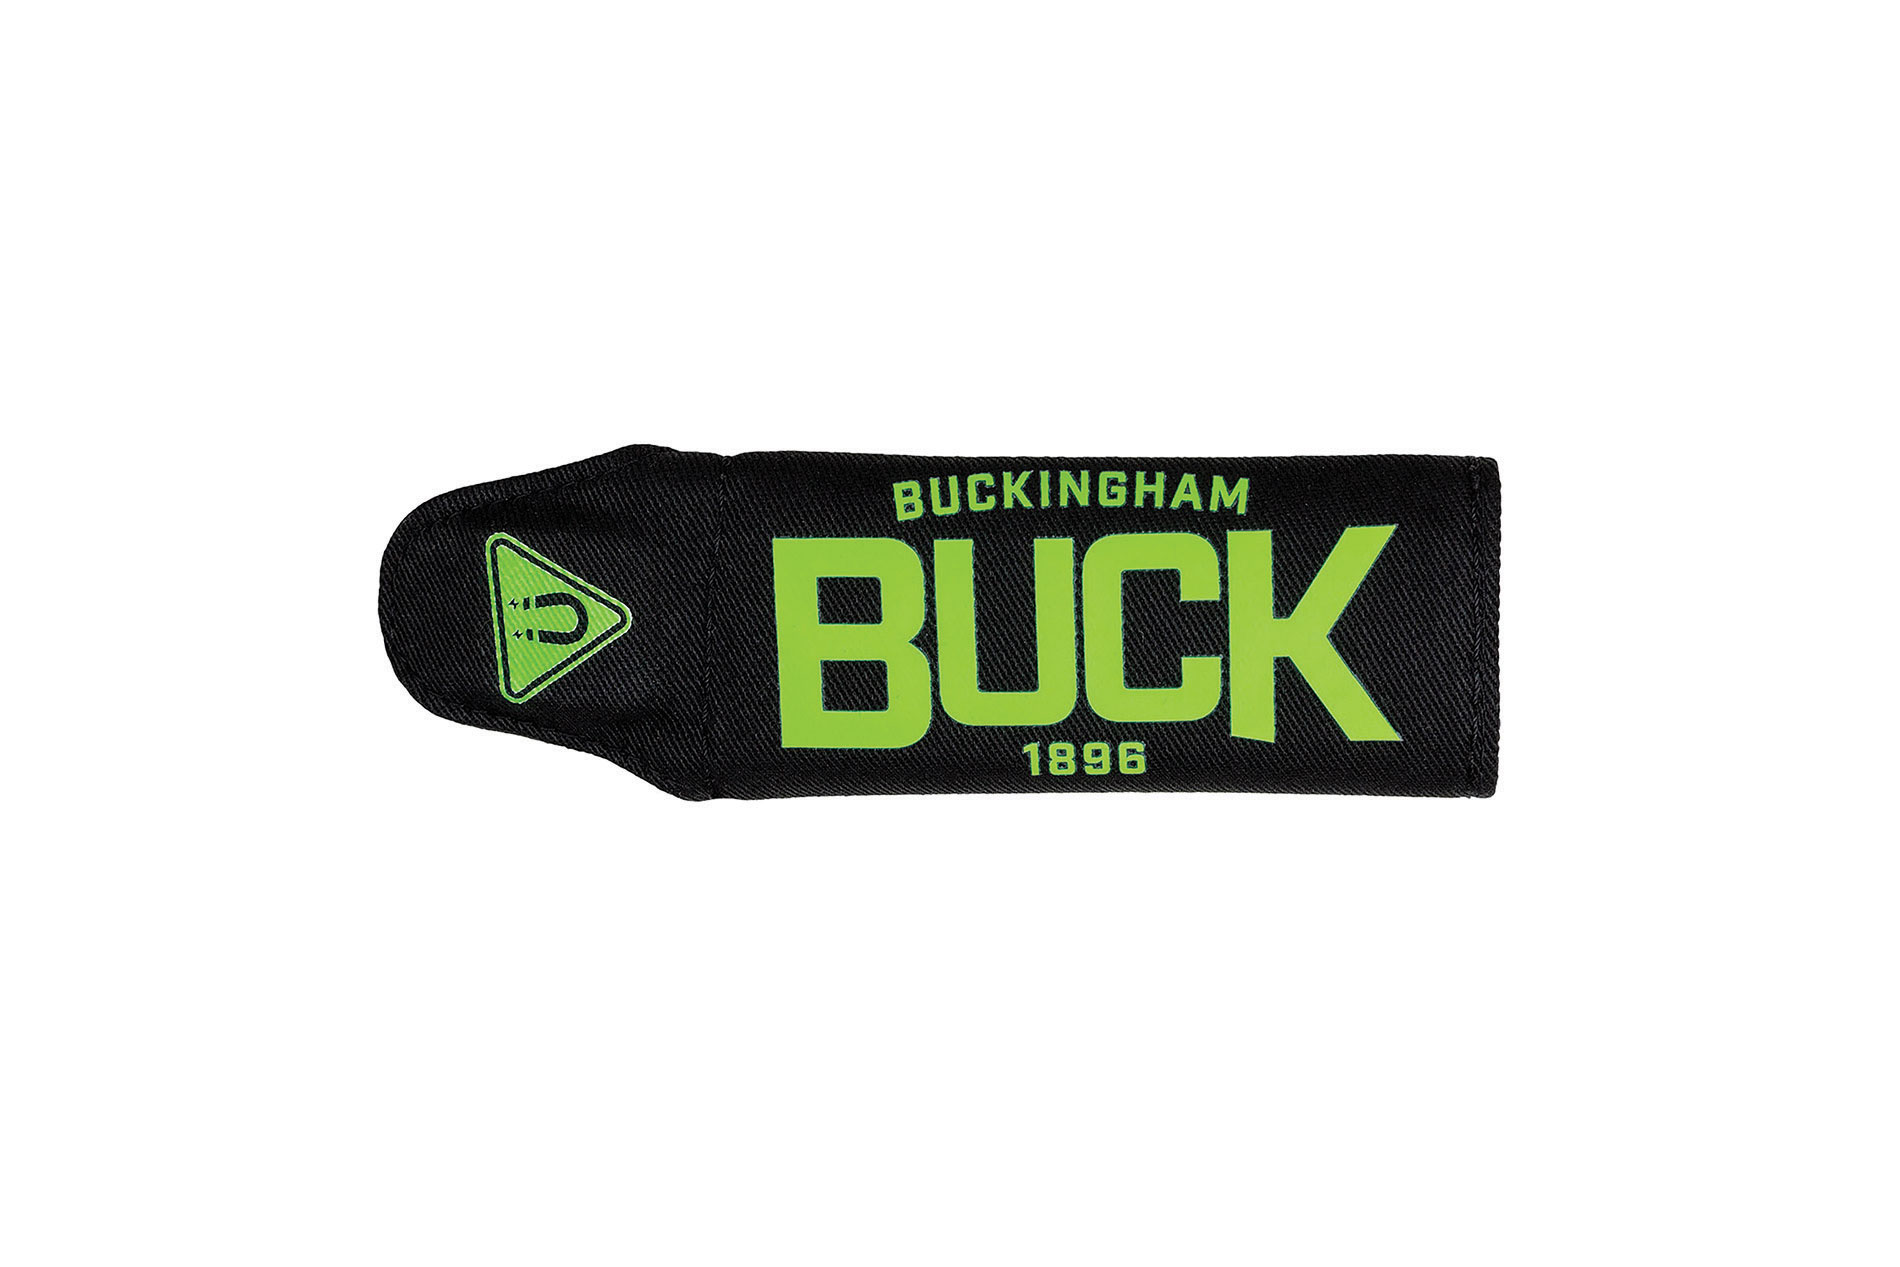 Black tool pouch with green Buckingham logo. Image by Buckingham.